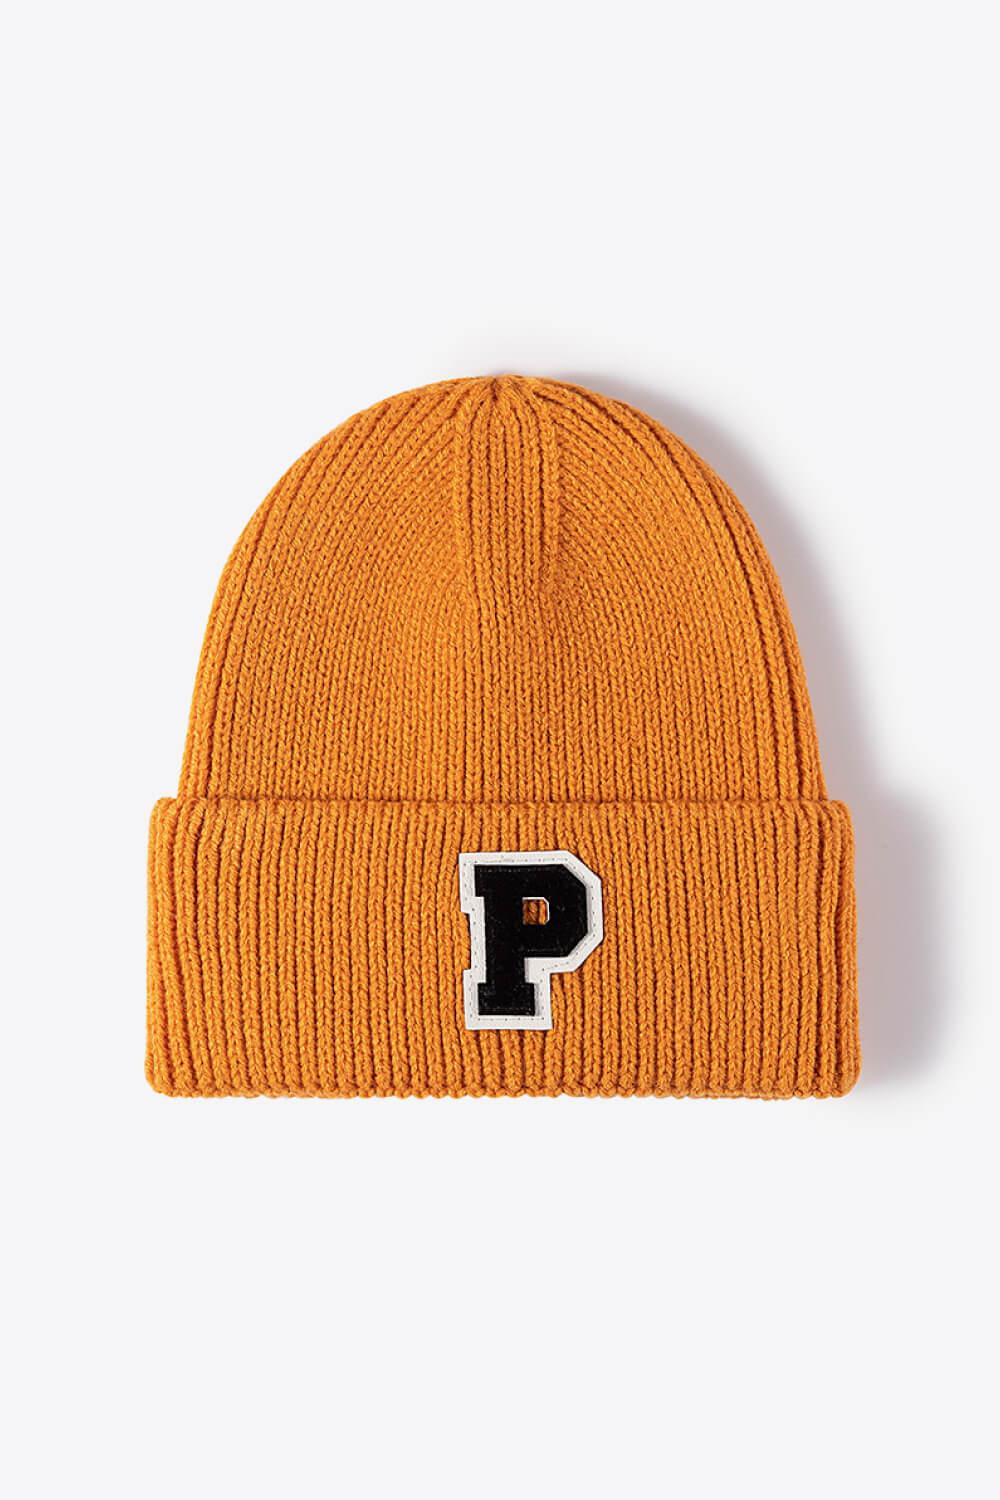 Letter Patch Cuffed Knit Beanie-[Adult]-[Female]-Orange-One Size-2022 Online Blue Zone Planet